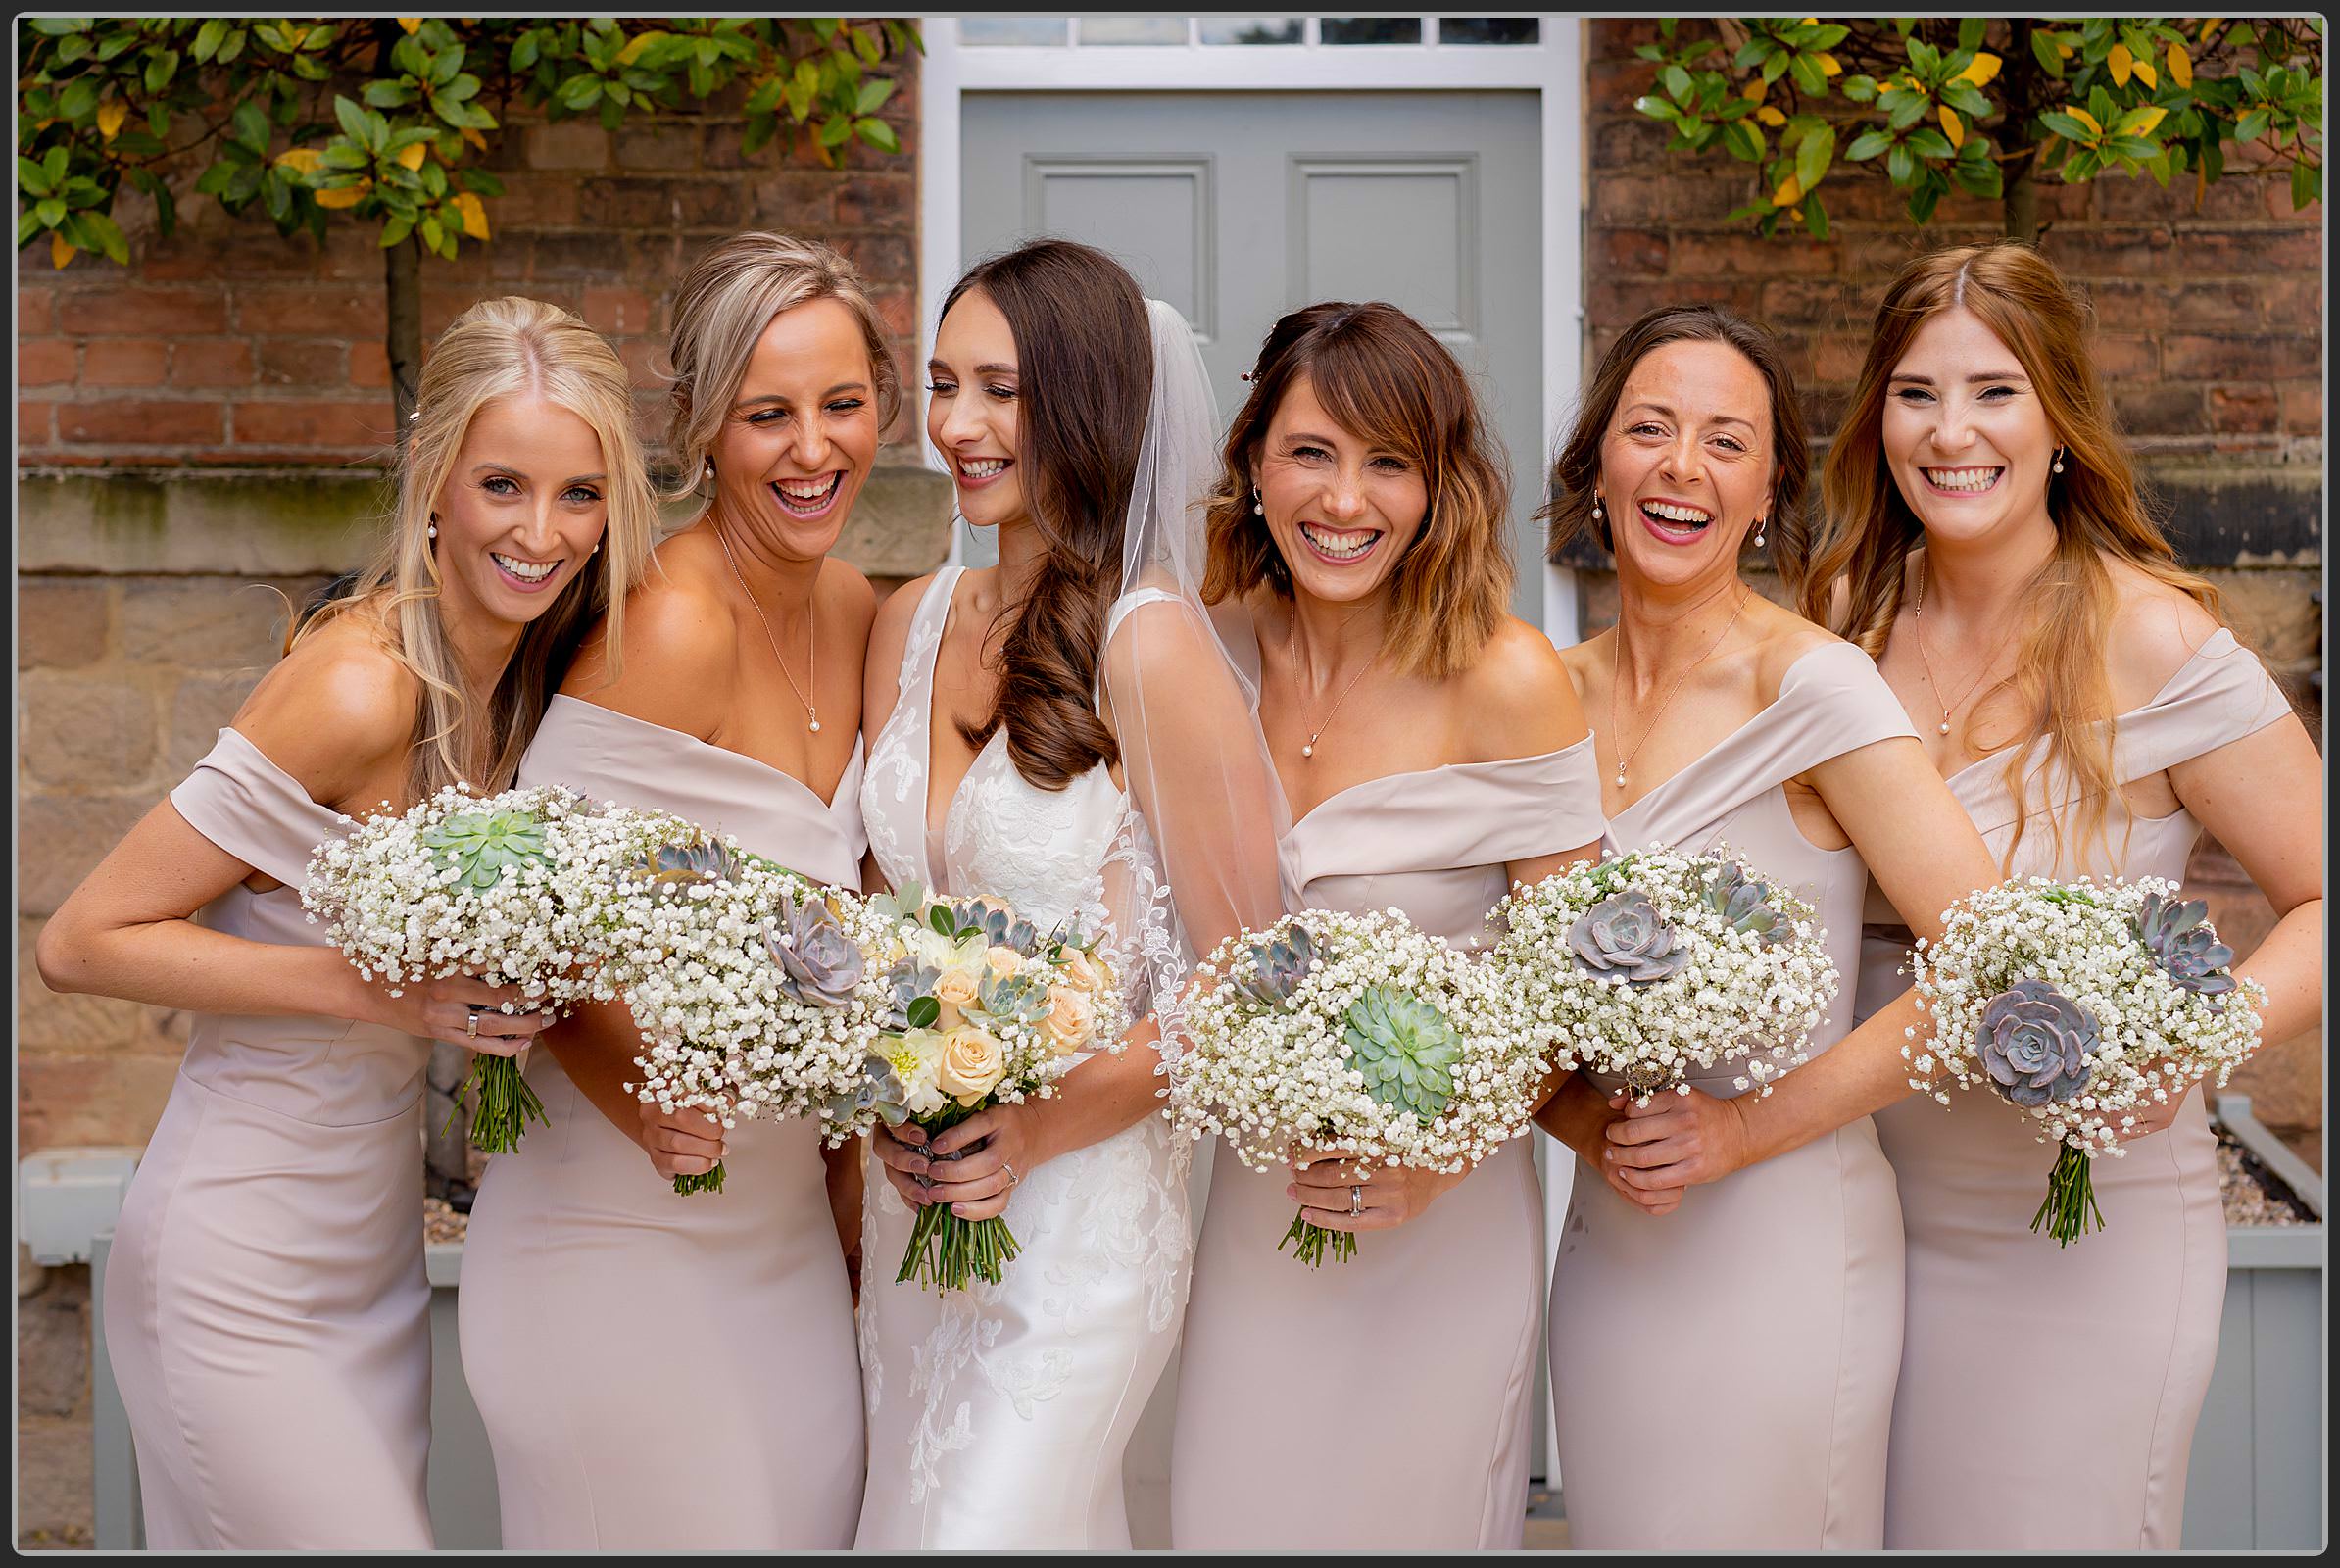 Ellie and her bridesmaids laughing